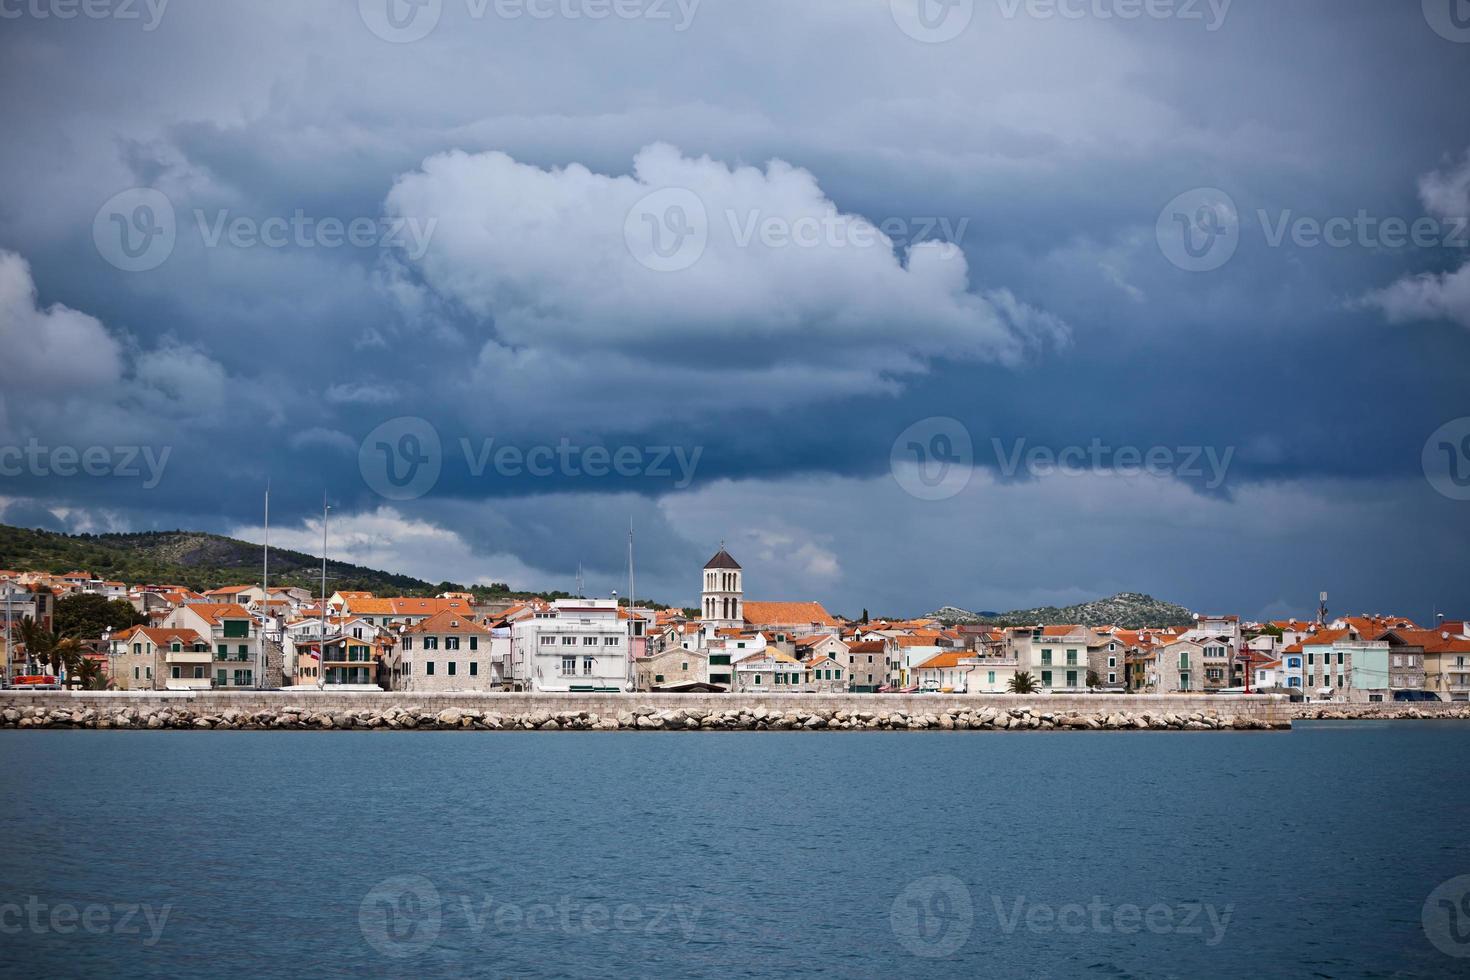 Vodice is a small town on the Adriatic coast in Croatia photo